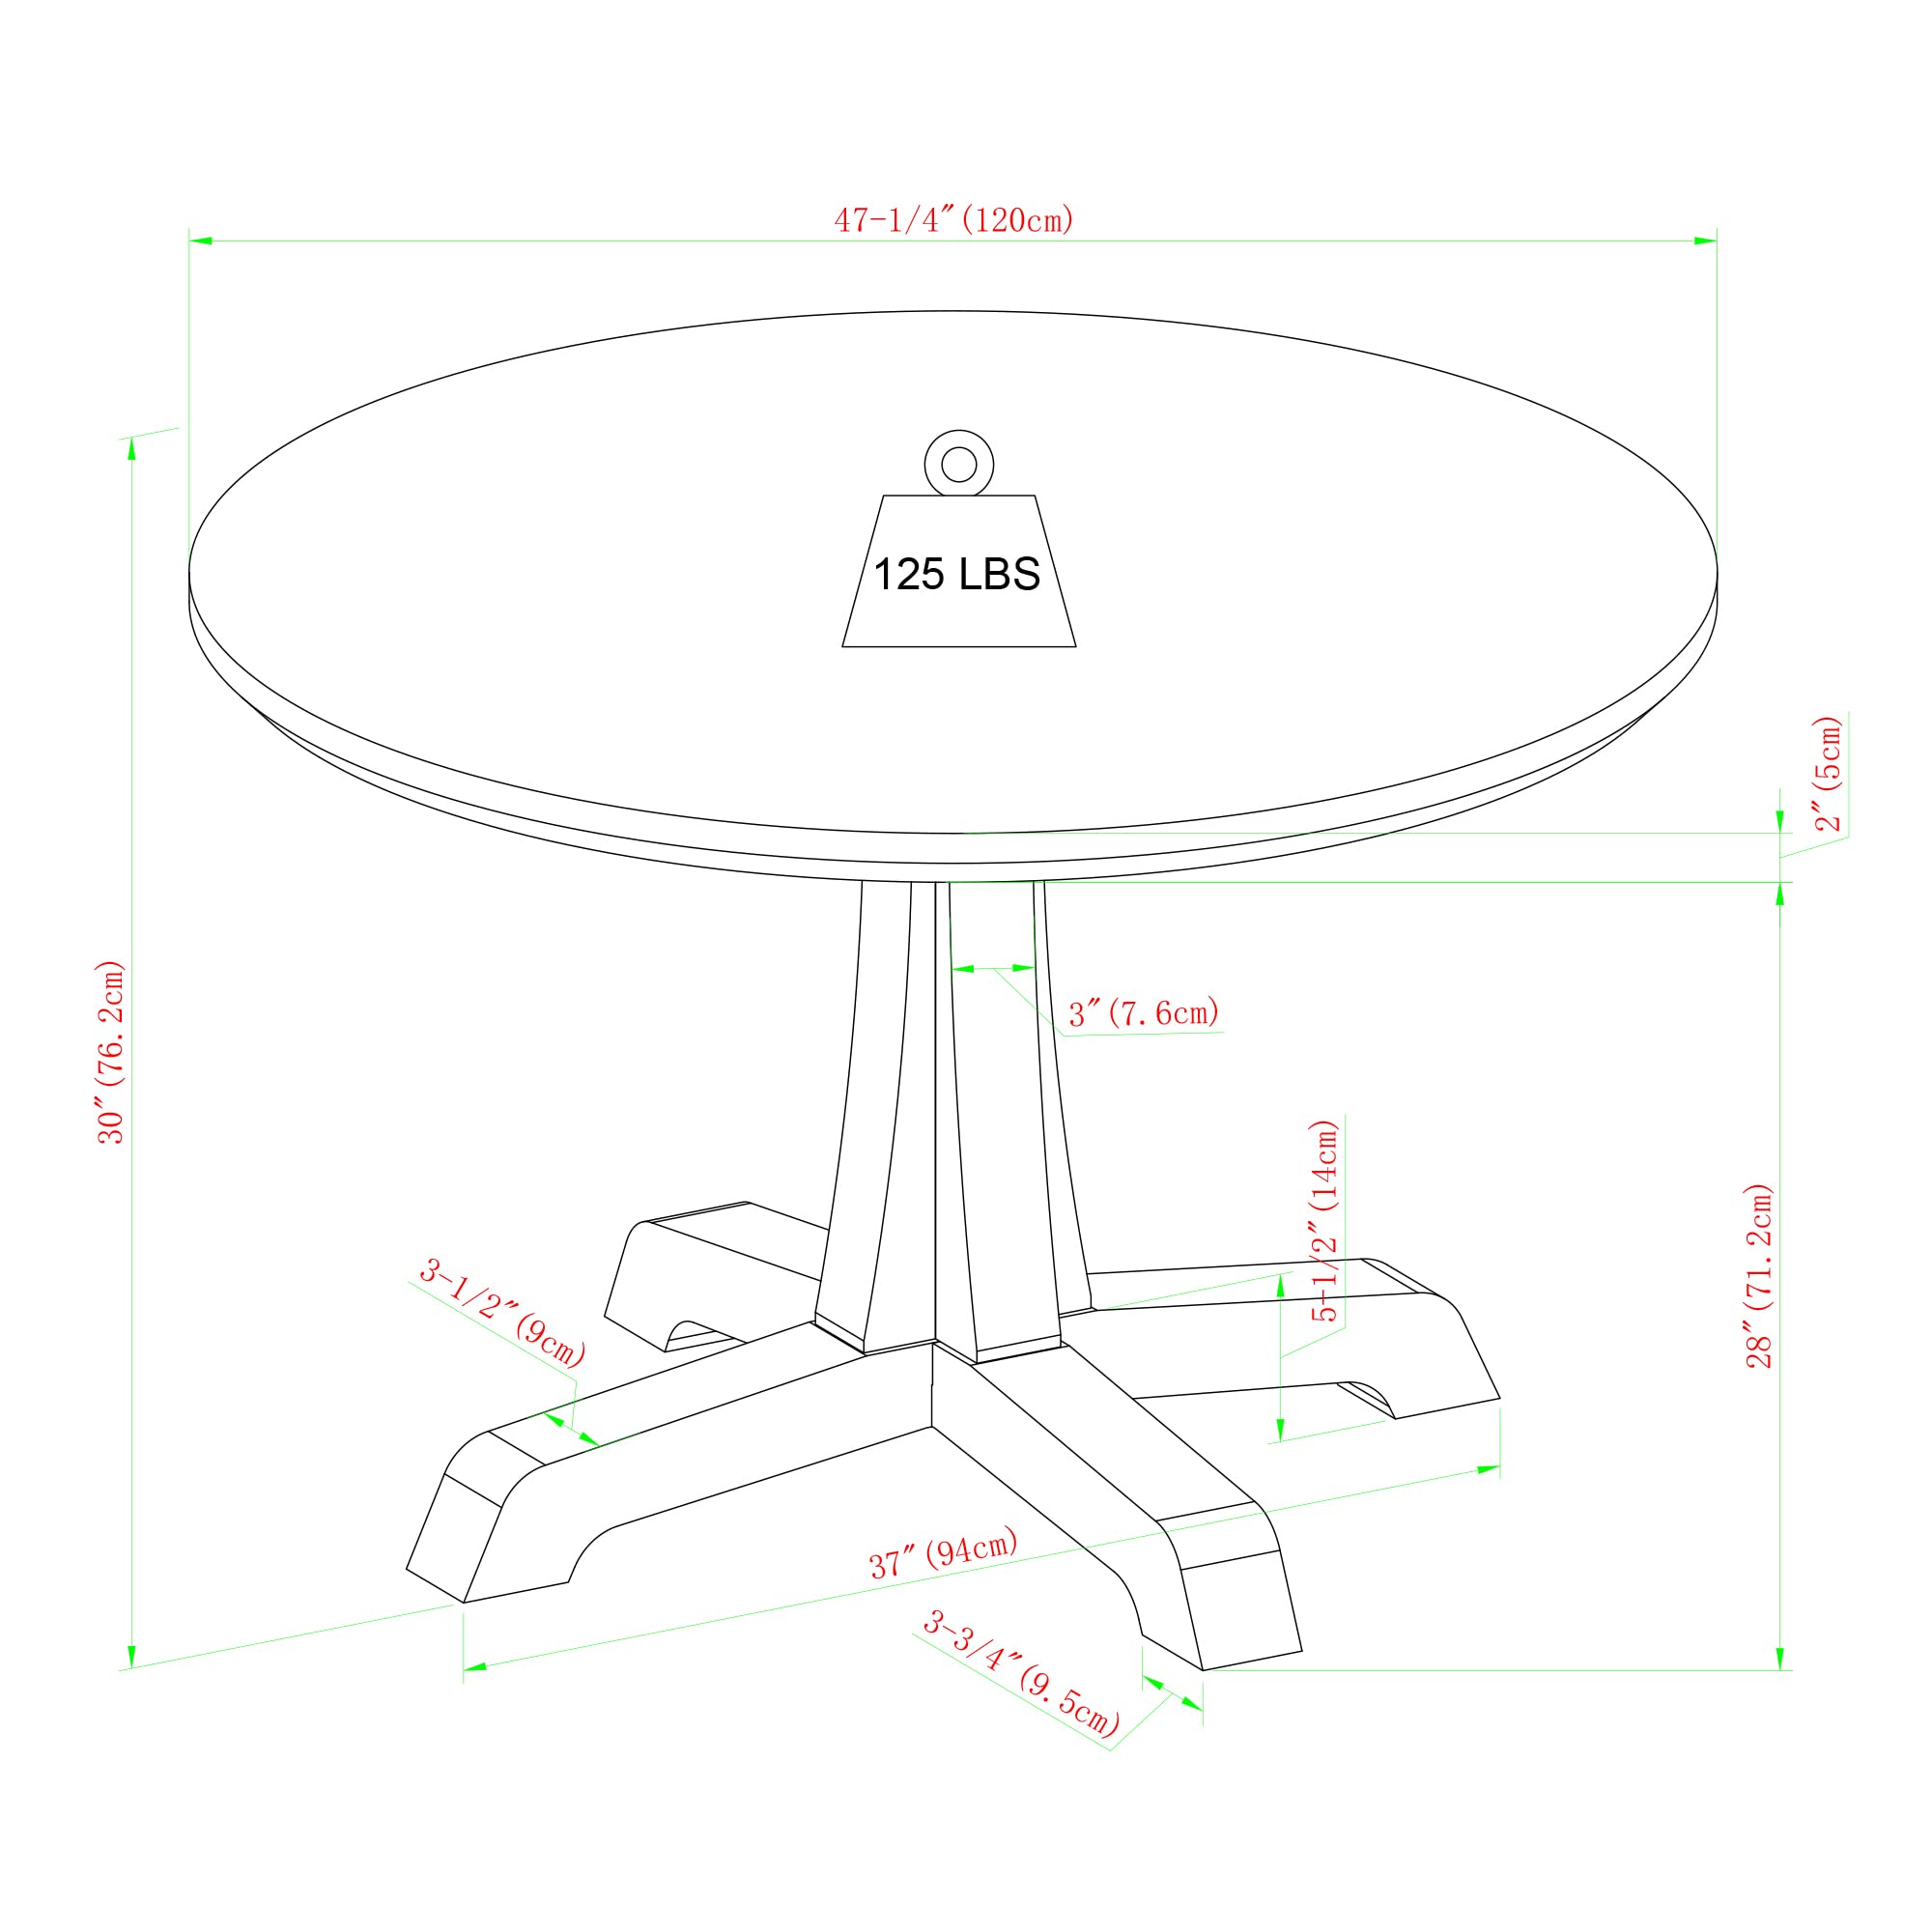 Walker Edison Caely Modern Simple Round Dining Table with Pedestal Base, 48 Inch, Black